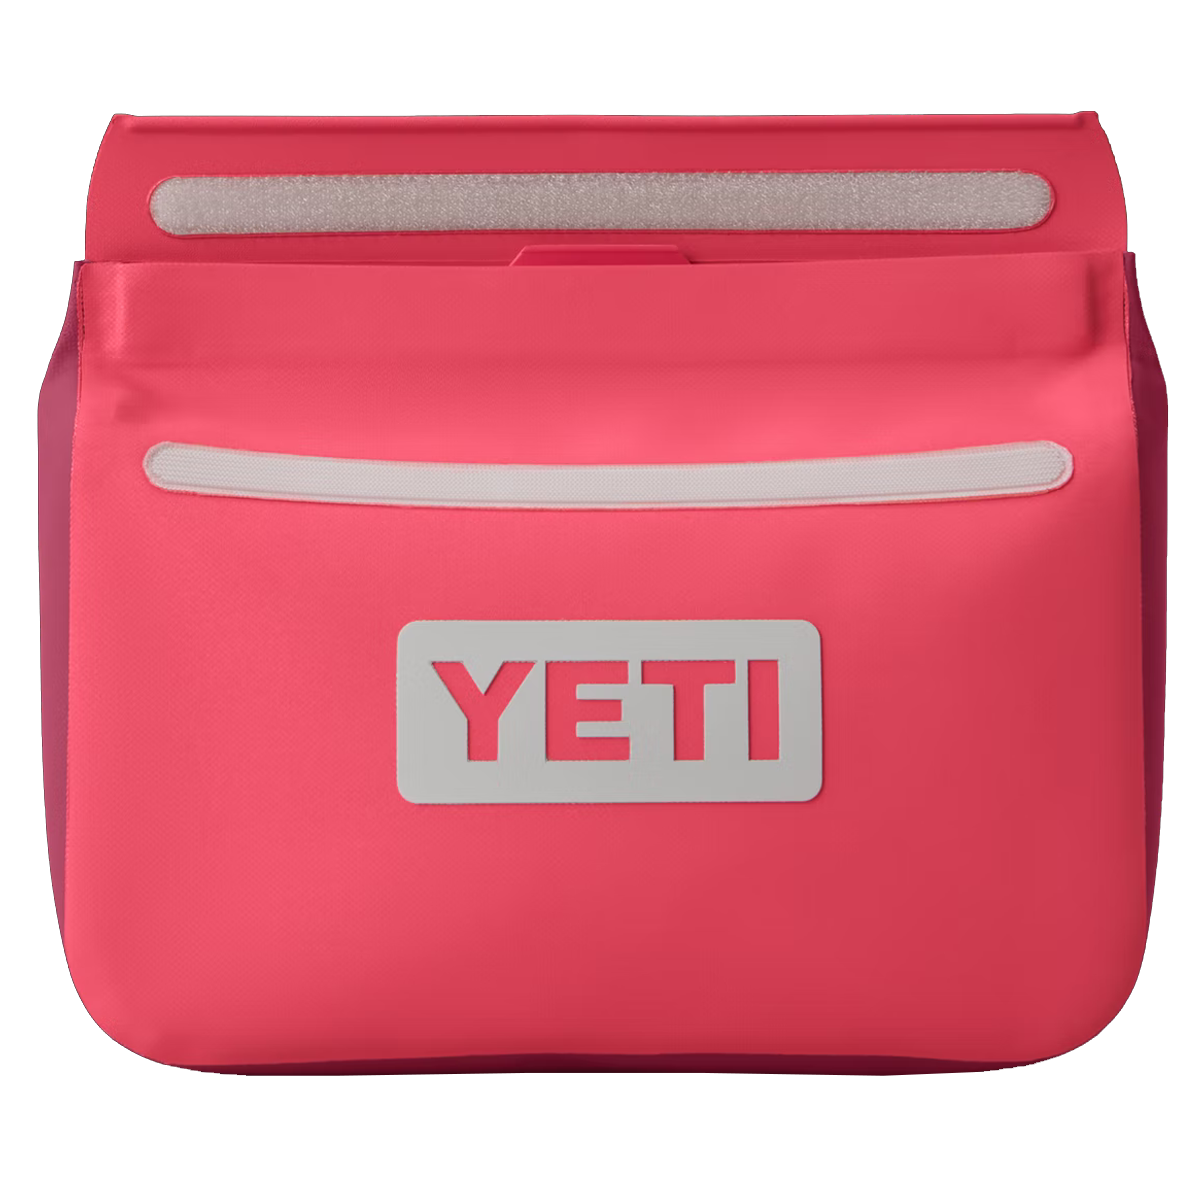 YETI Just Restocked The SideKick Dry Gear Case Following A 10,000-Person  Waitlist - BroBible